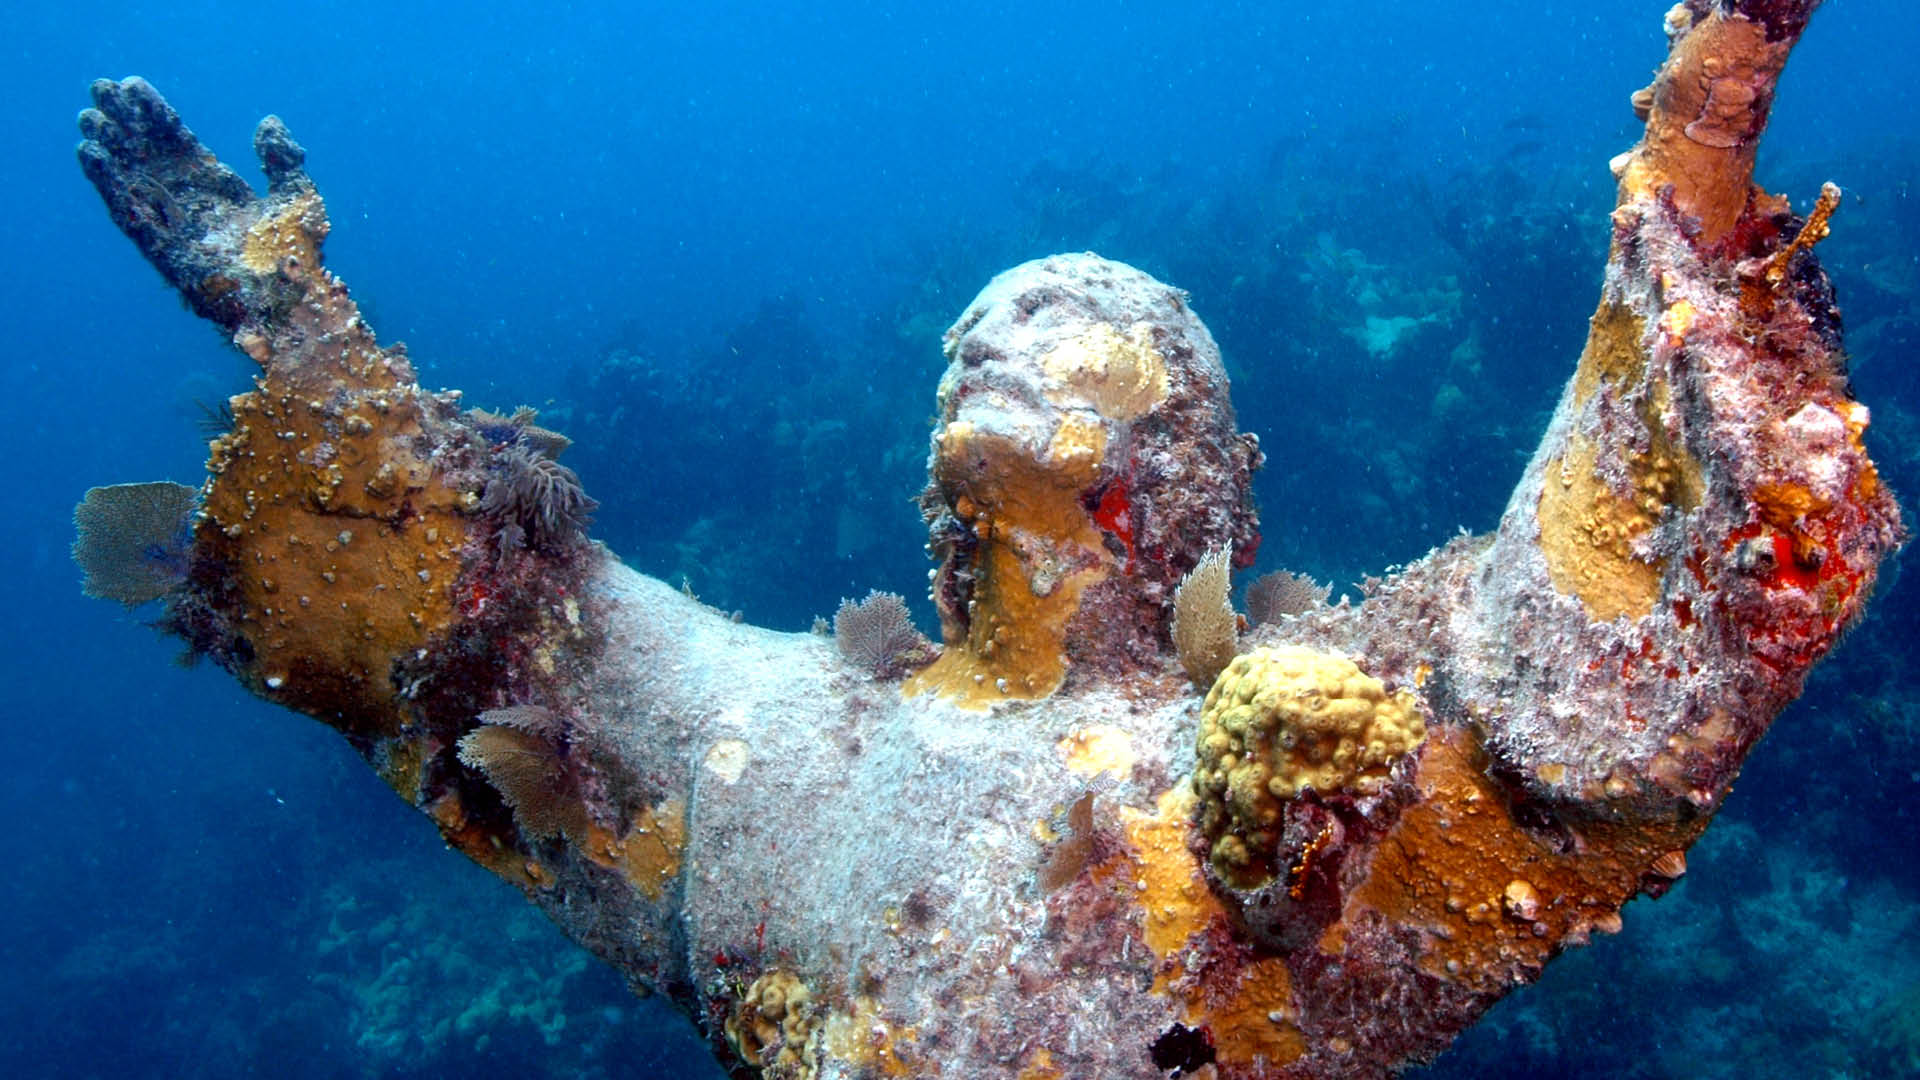 Cancún Underwater Museum Archives > Travel + Leisure India